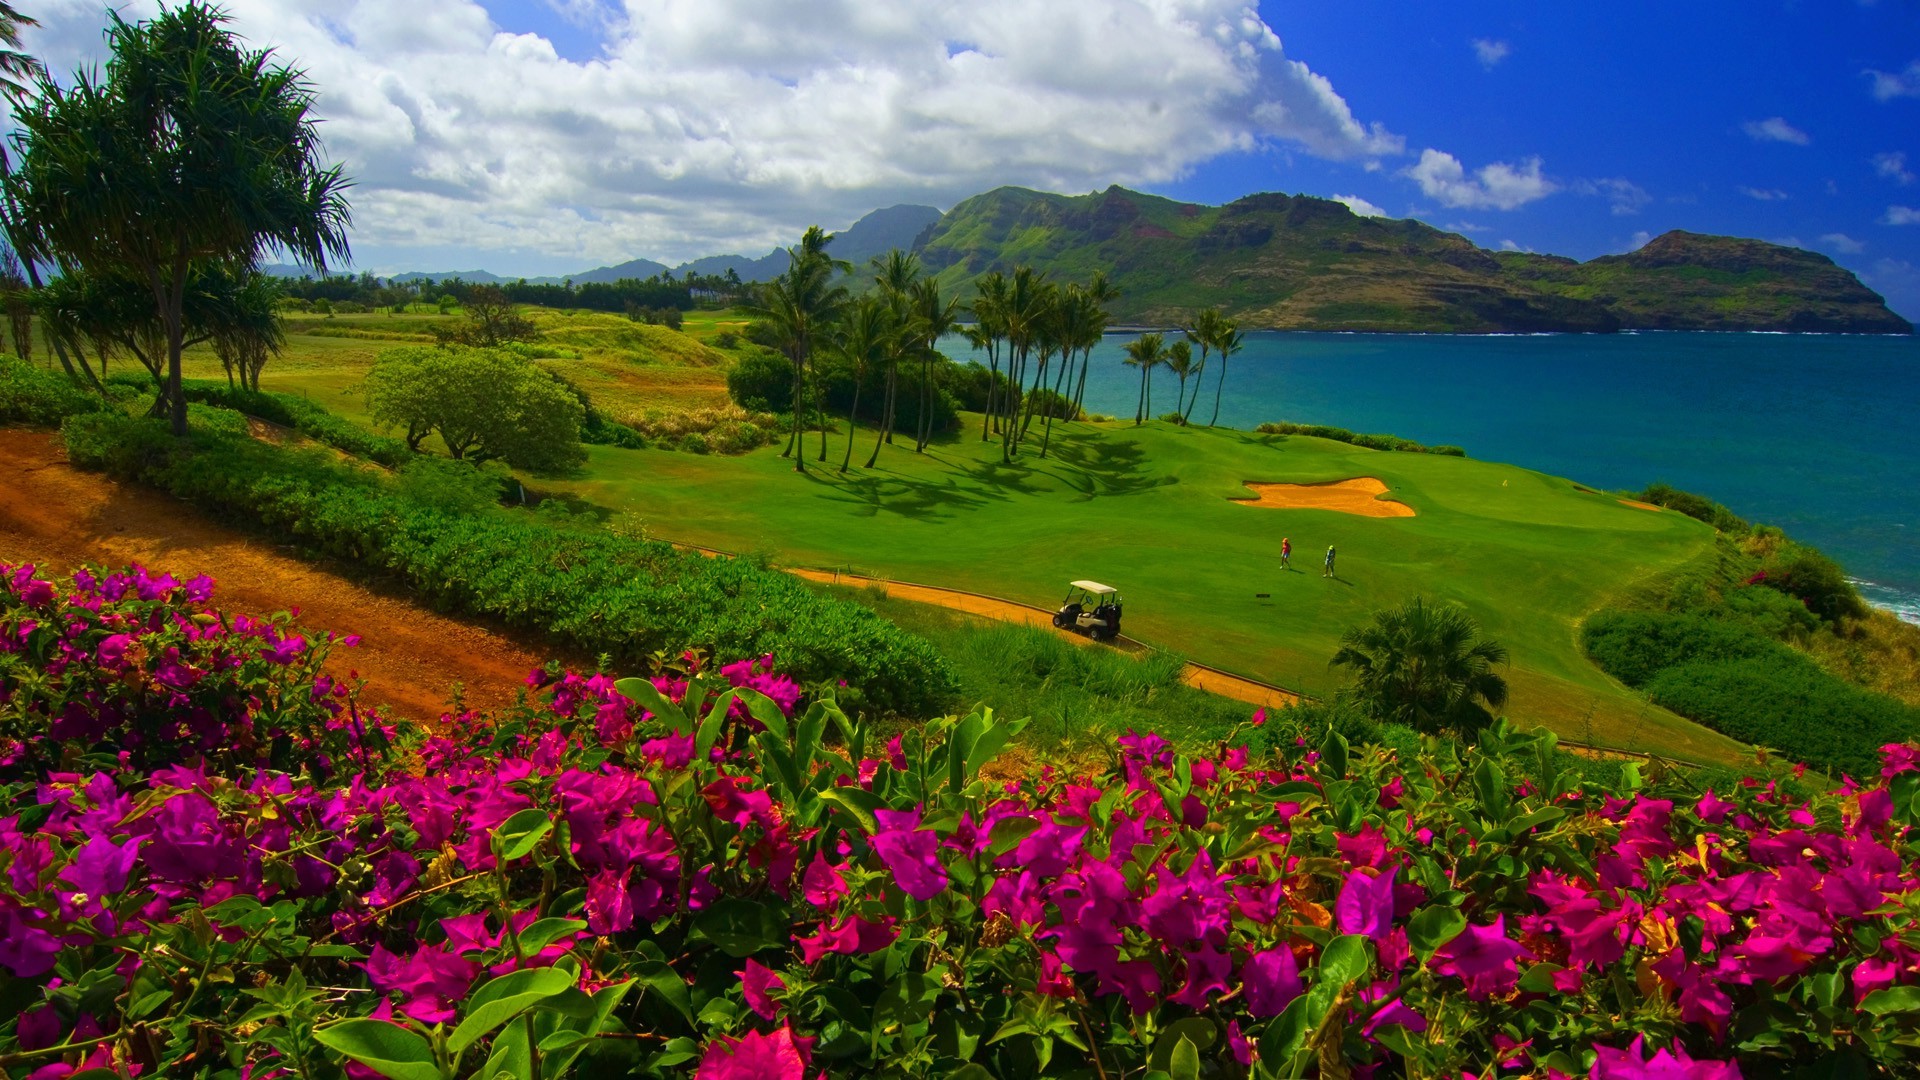 nature, Landscape, Water, Trees, Sea, Hawaii, Golf Course, Flowers, Grass, Sand, Palm Trees, Mountain, Hill, Clouds Wallpaper